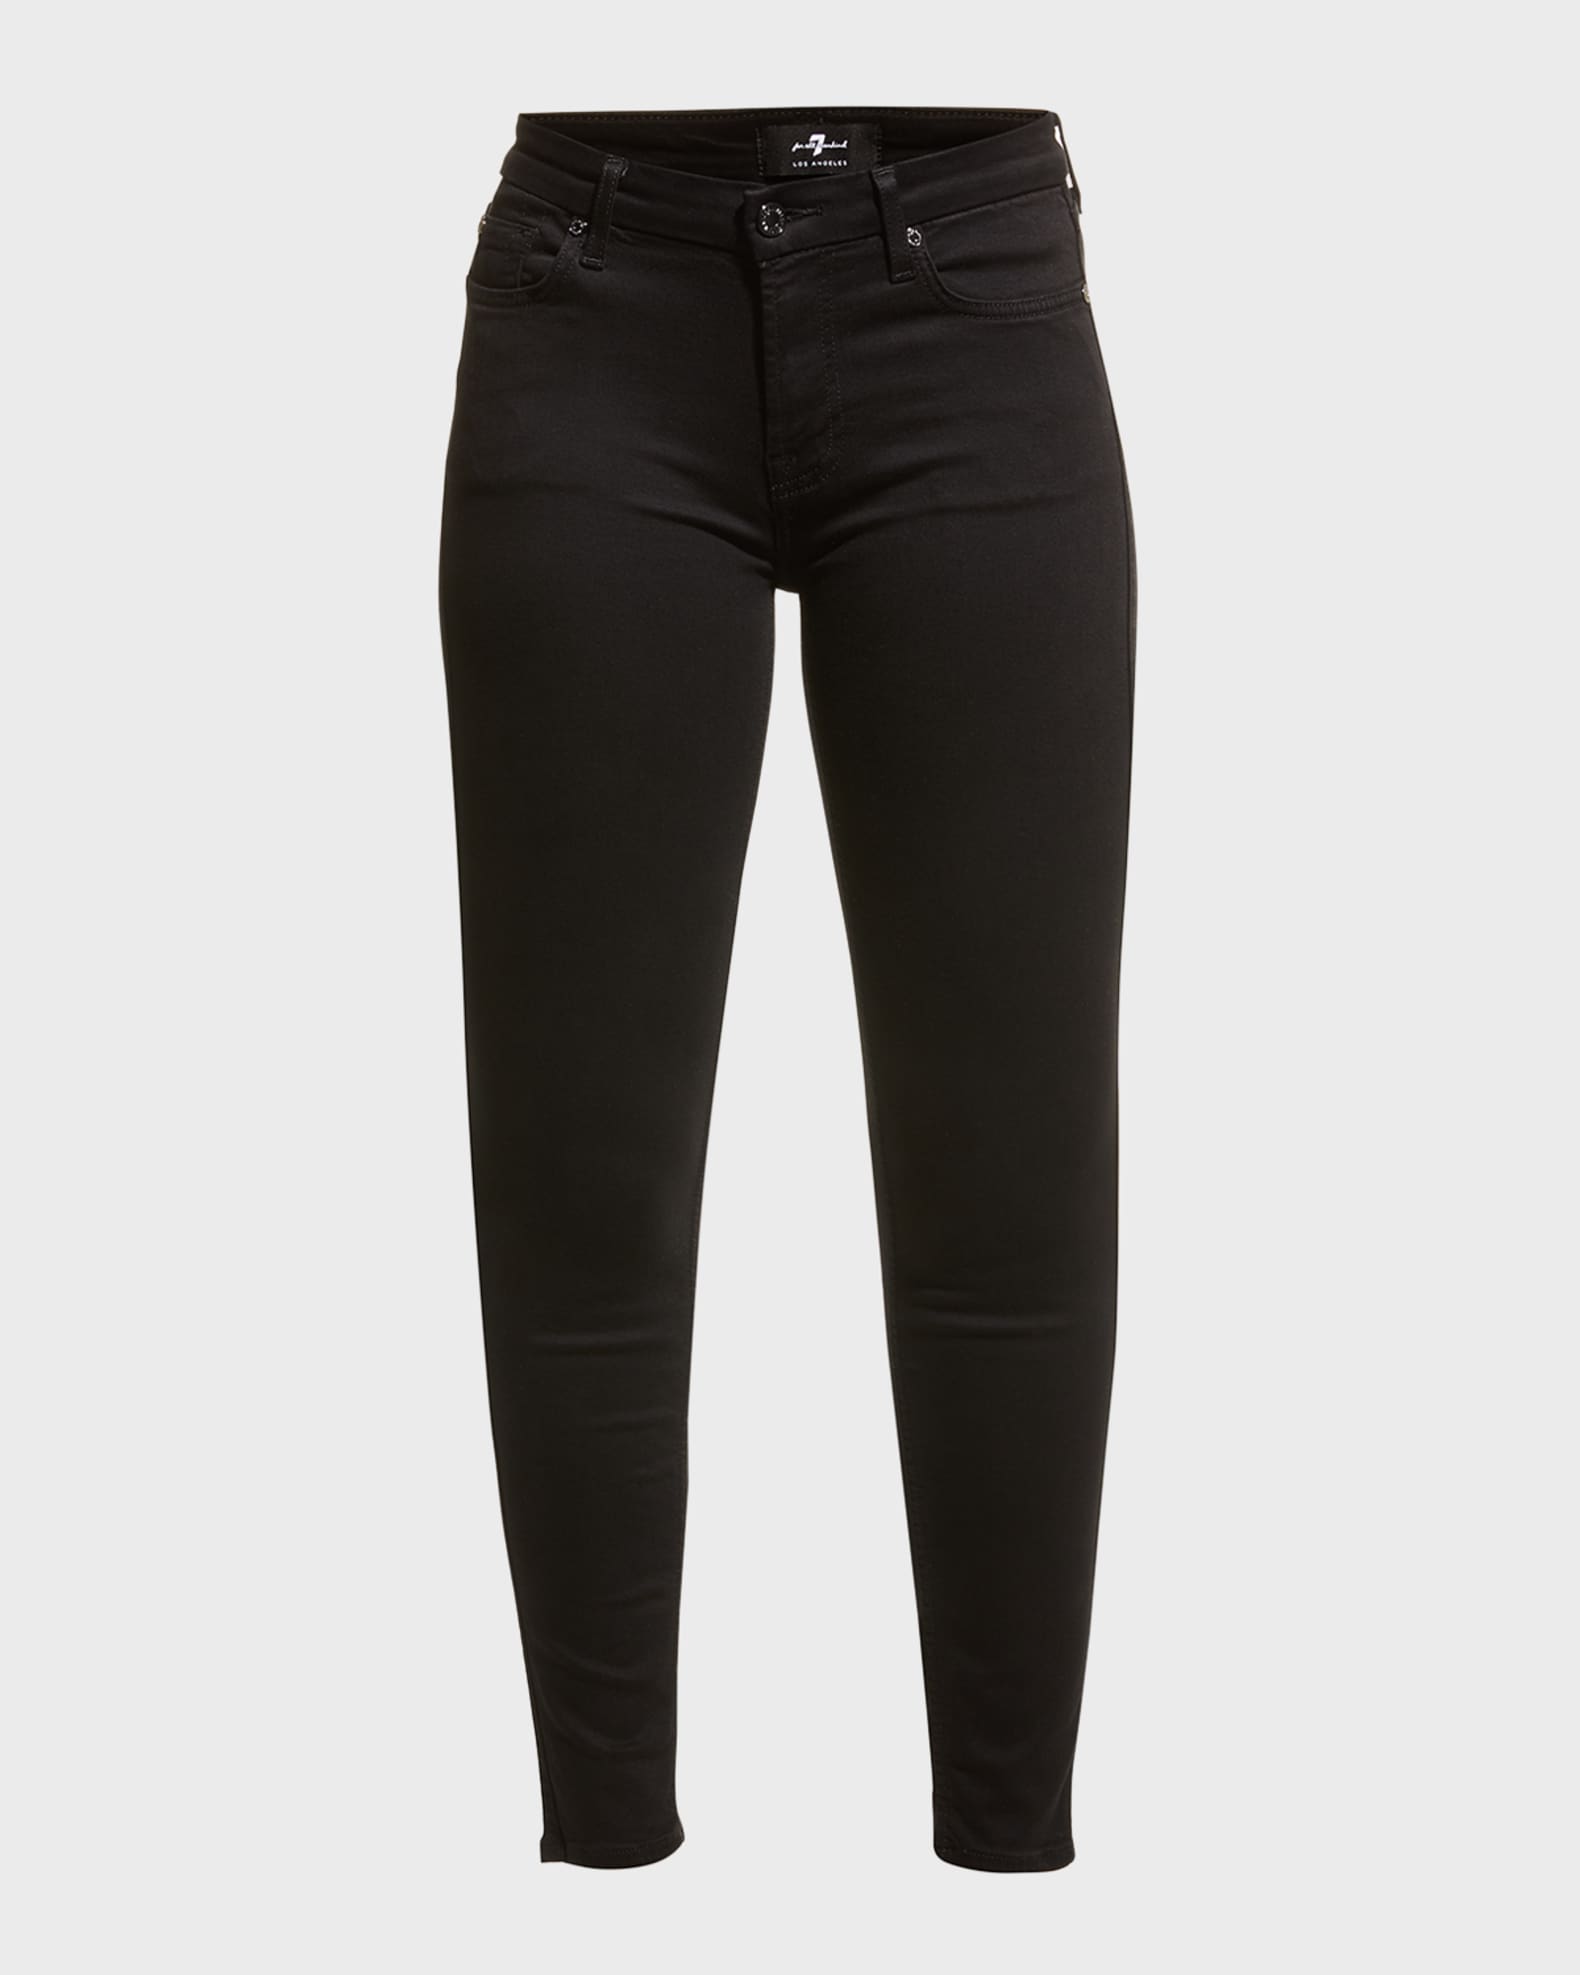 7 for all mankind The Ankle Skinny Jeans, Black | Neiman Marcus